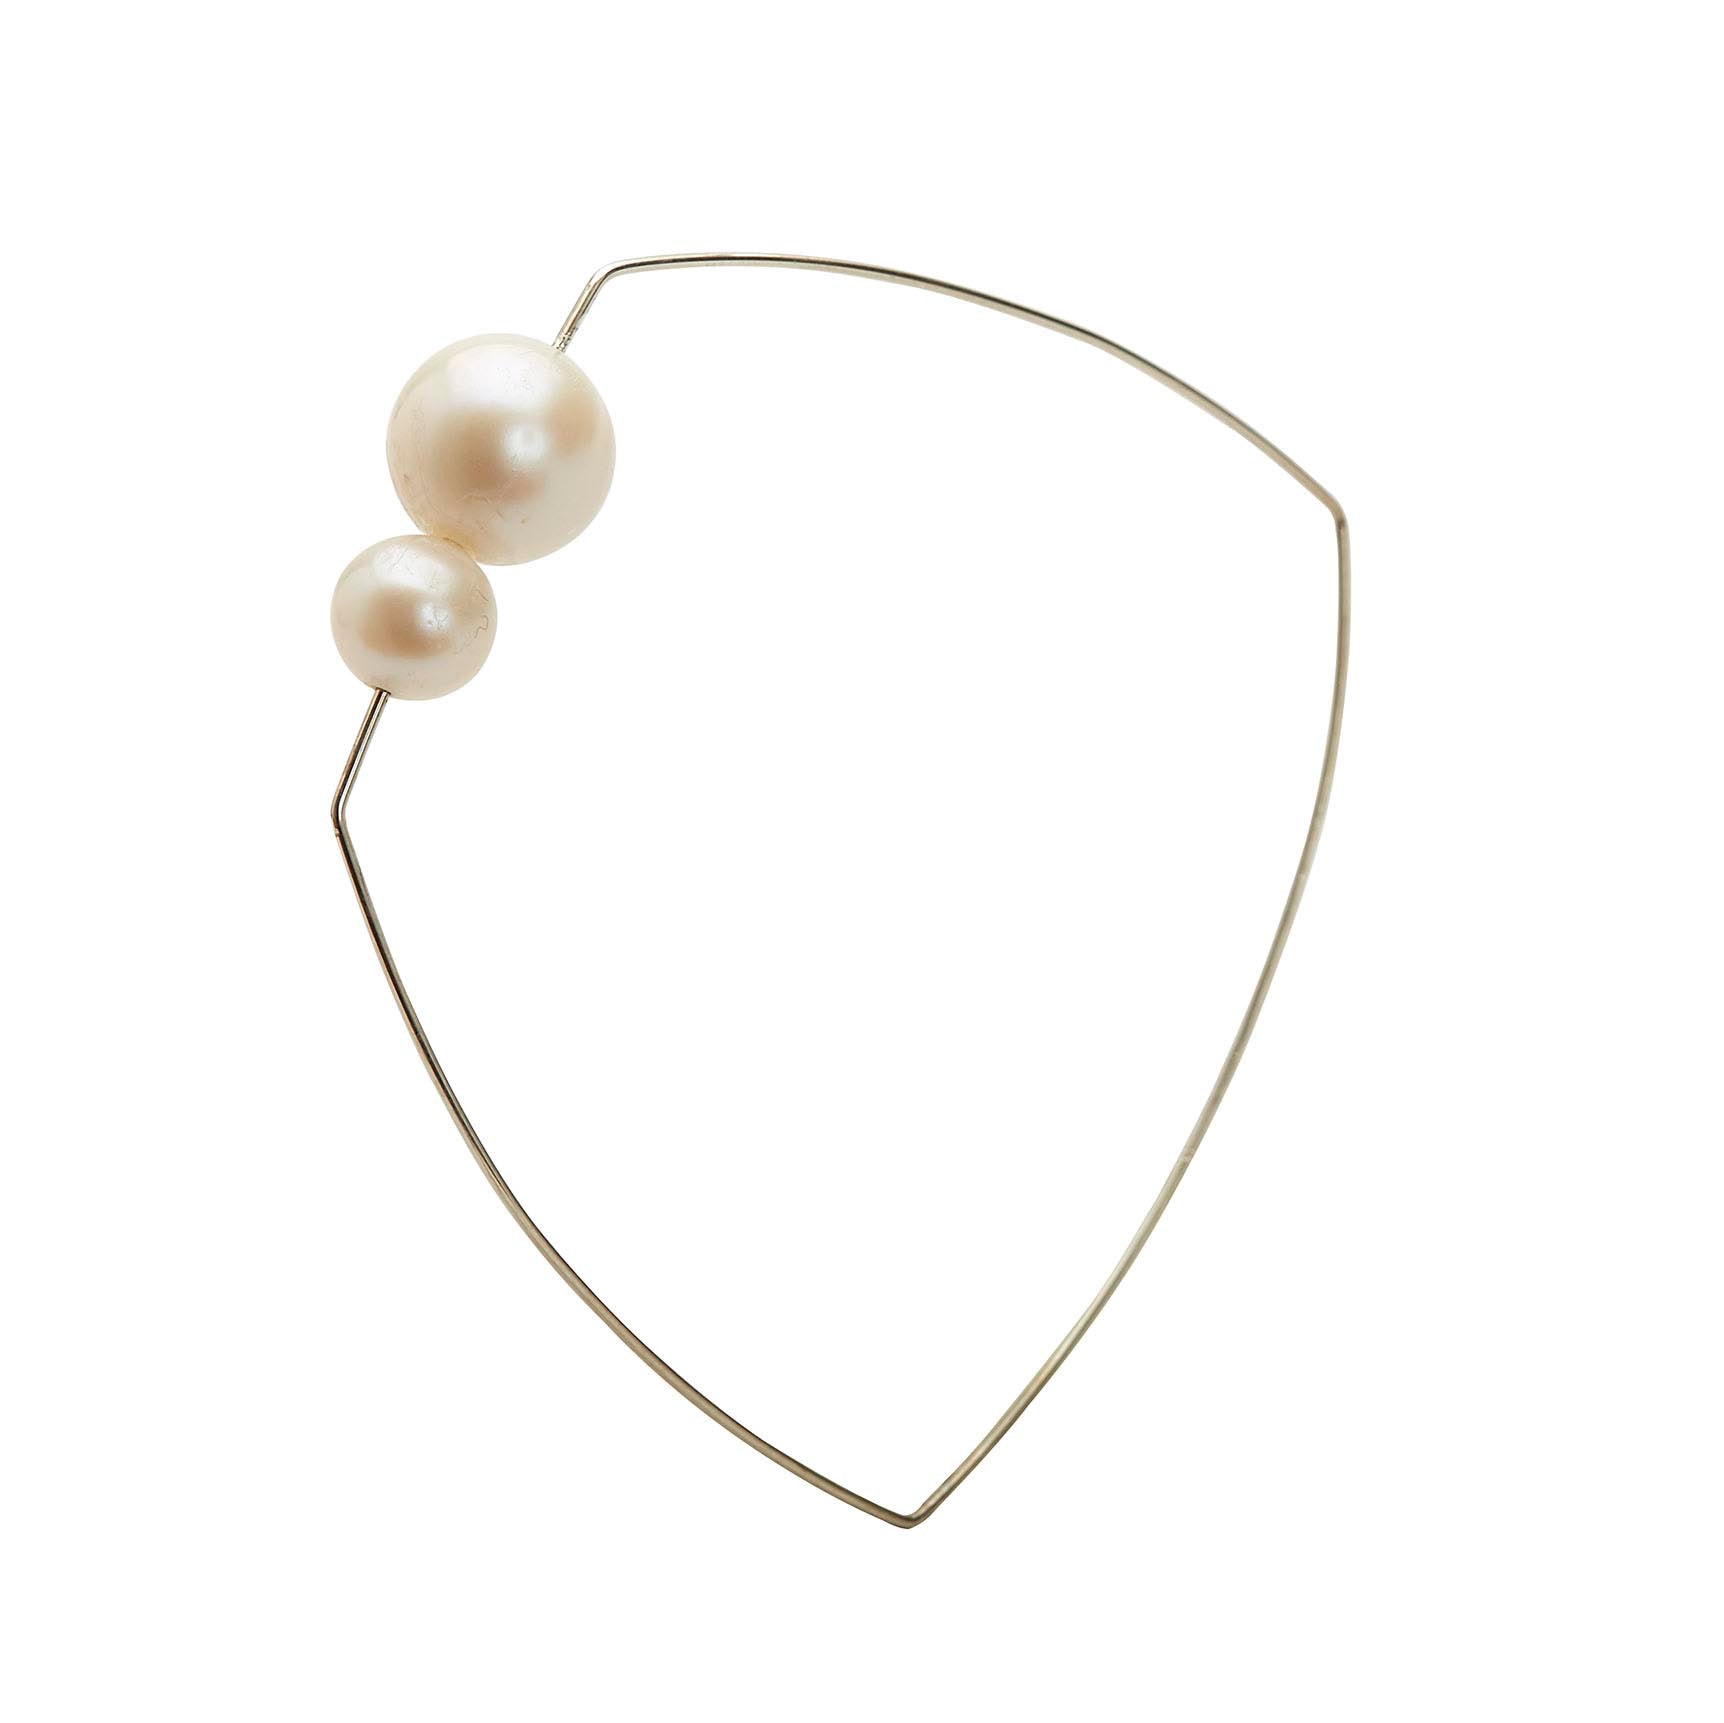 Asymmetric Square Bangle with White Pearls